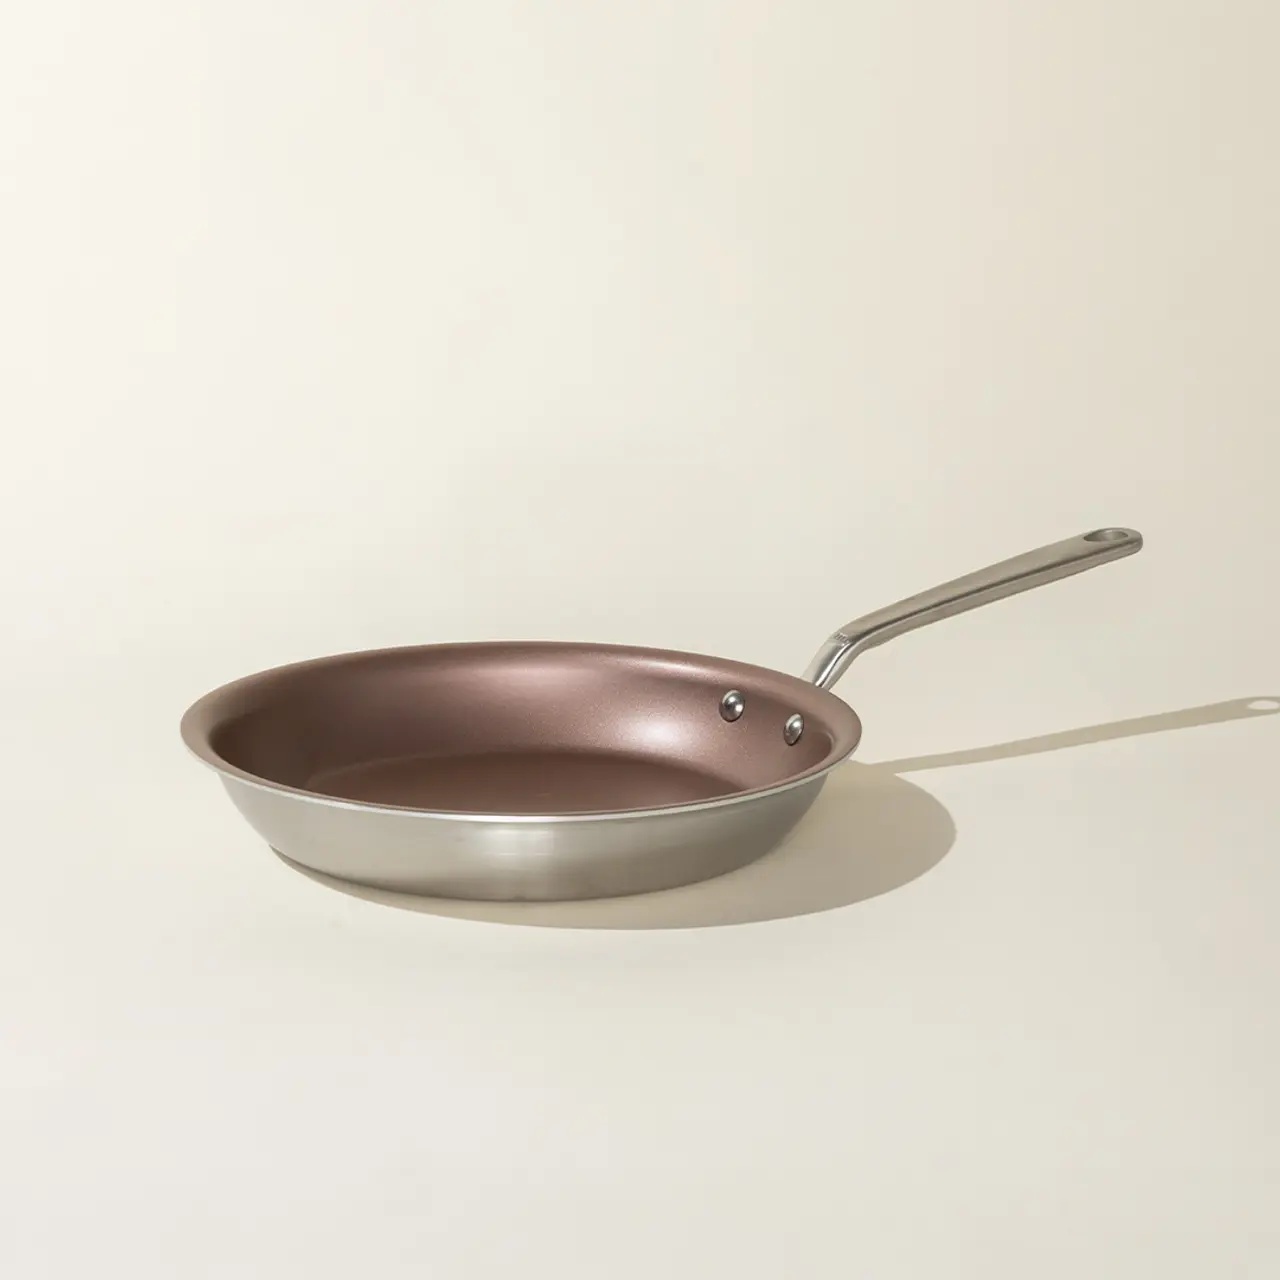 A single stainless steel frying pan with a copper-colored interior and a long handle is positioned against a neutral background.